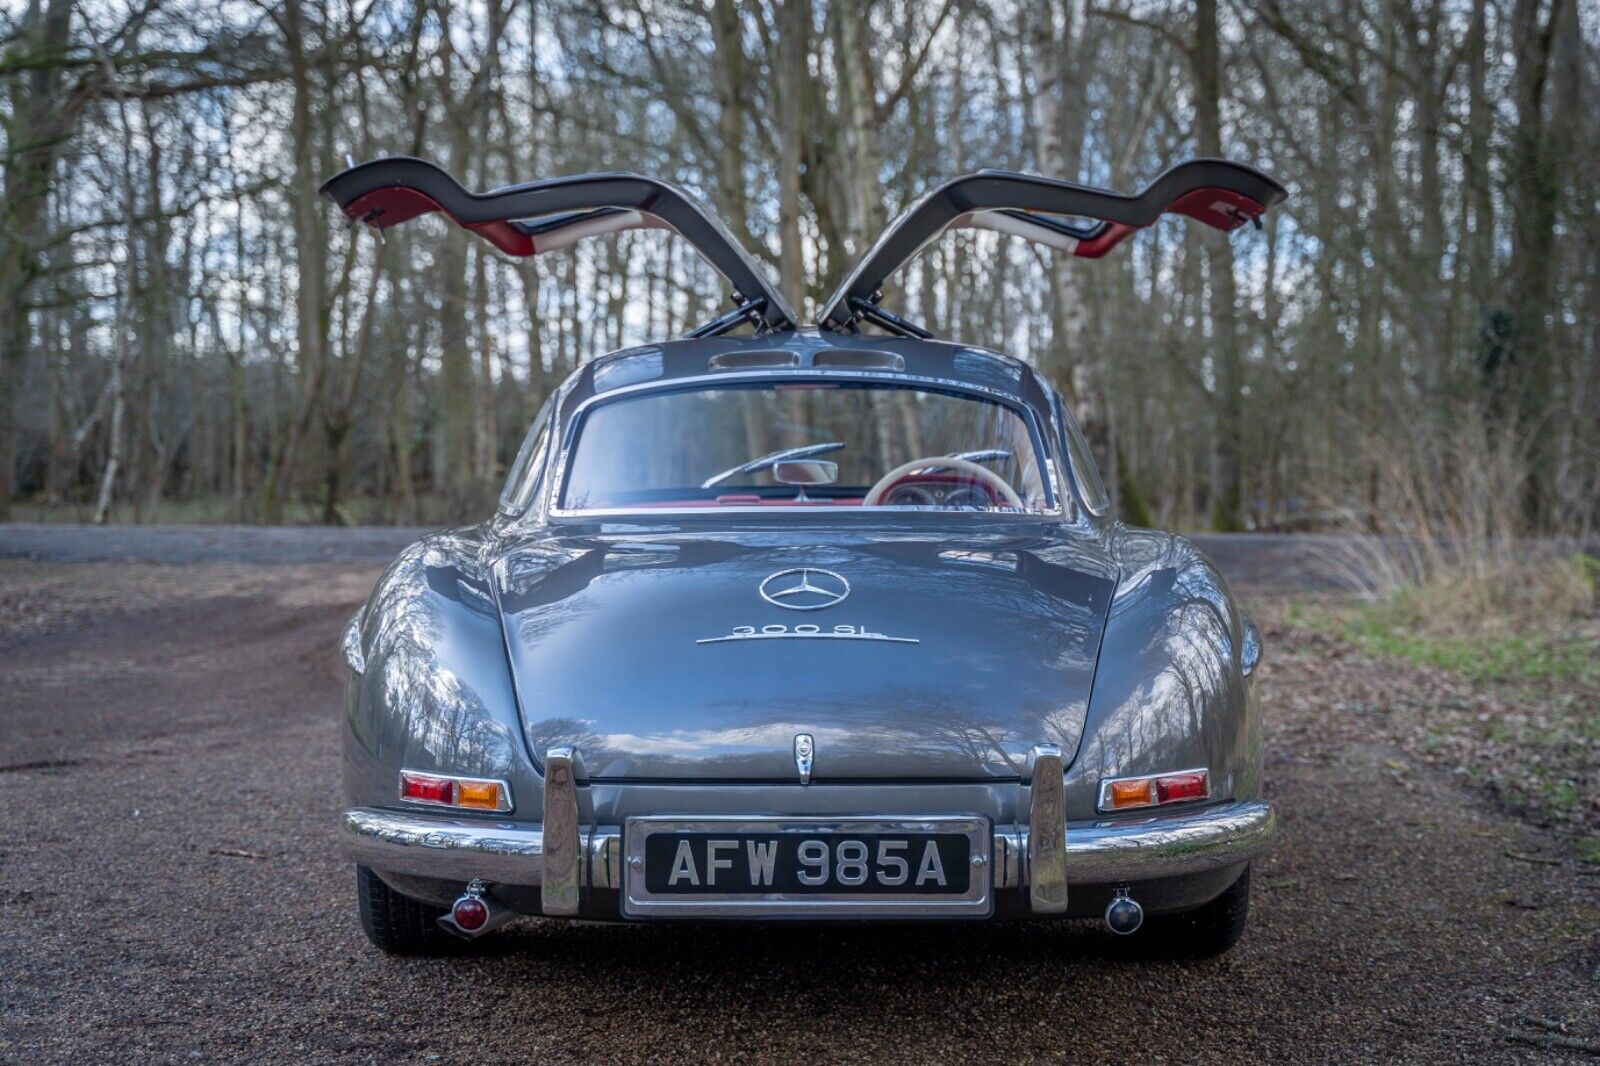 Would you pay £200,000 for this uncanny ‘Gullwing’ replica based on an SLK?